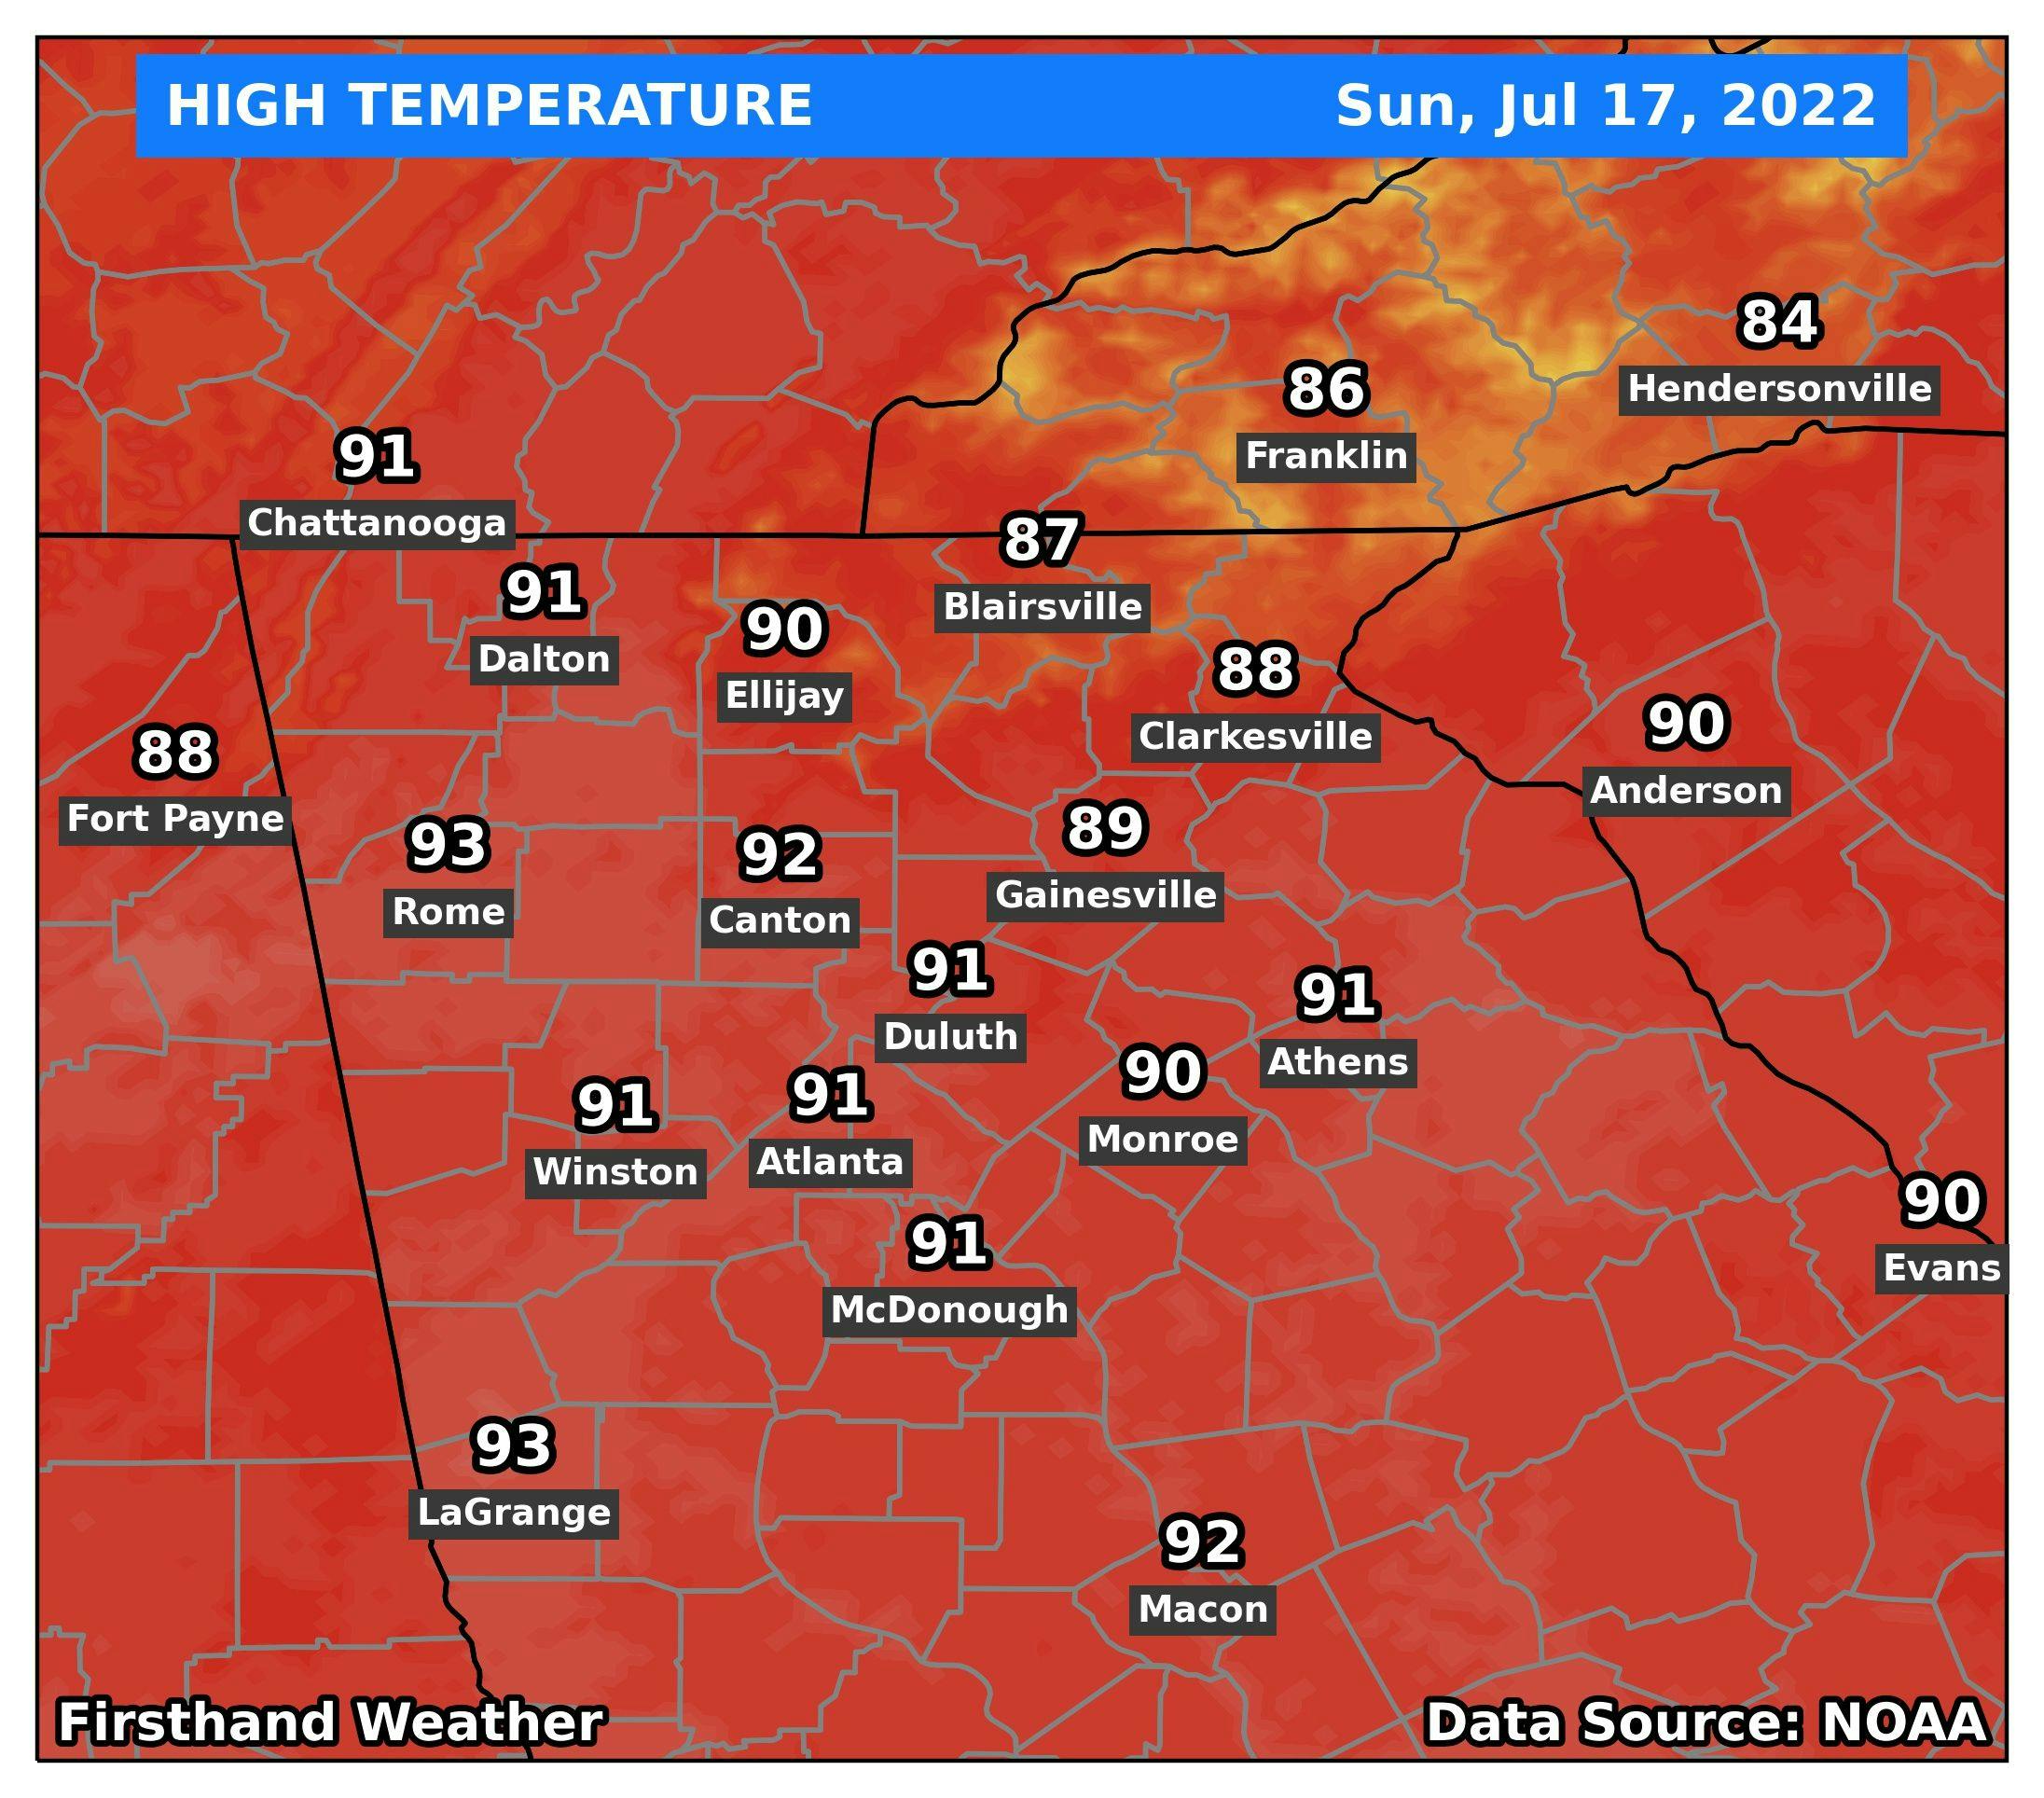 Sunday afternoon high temperatures